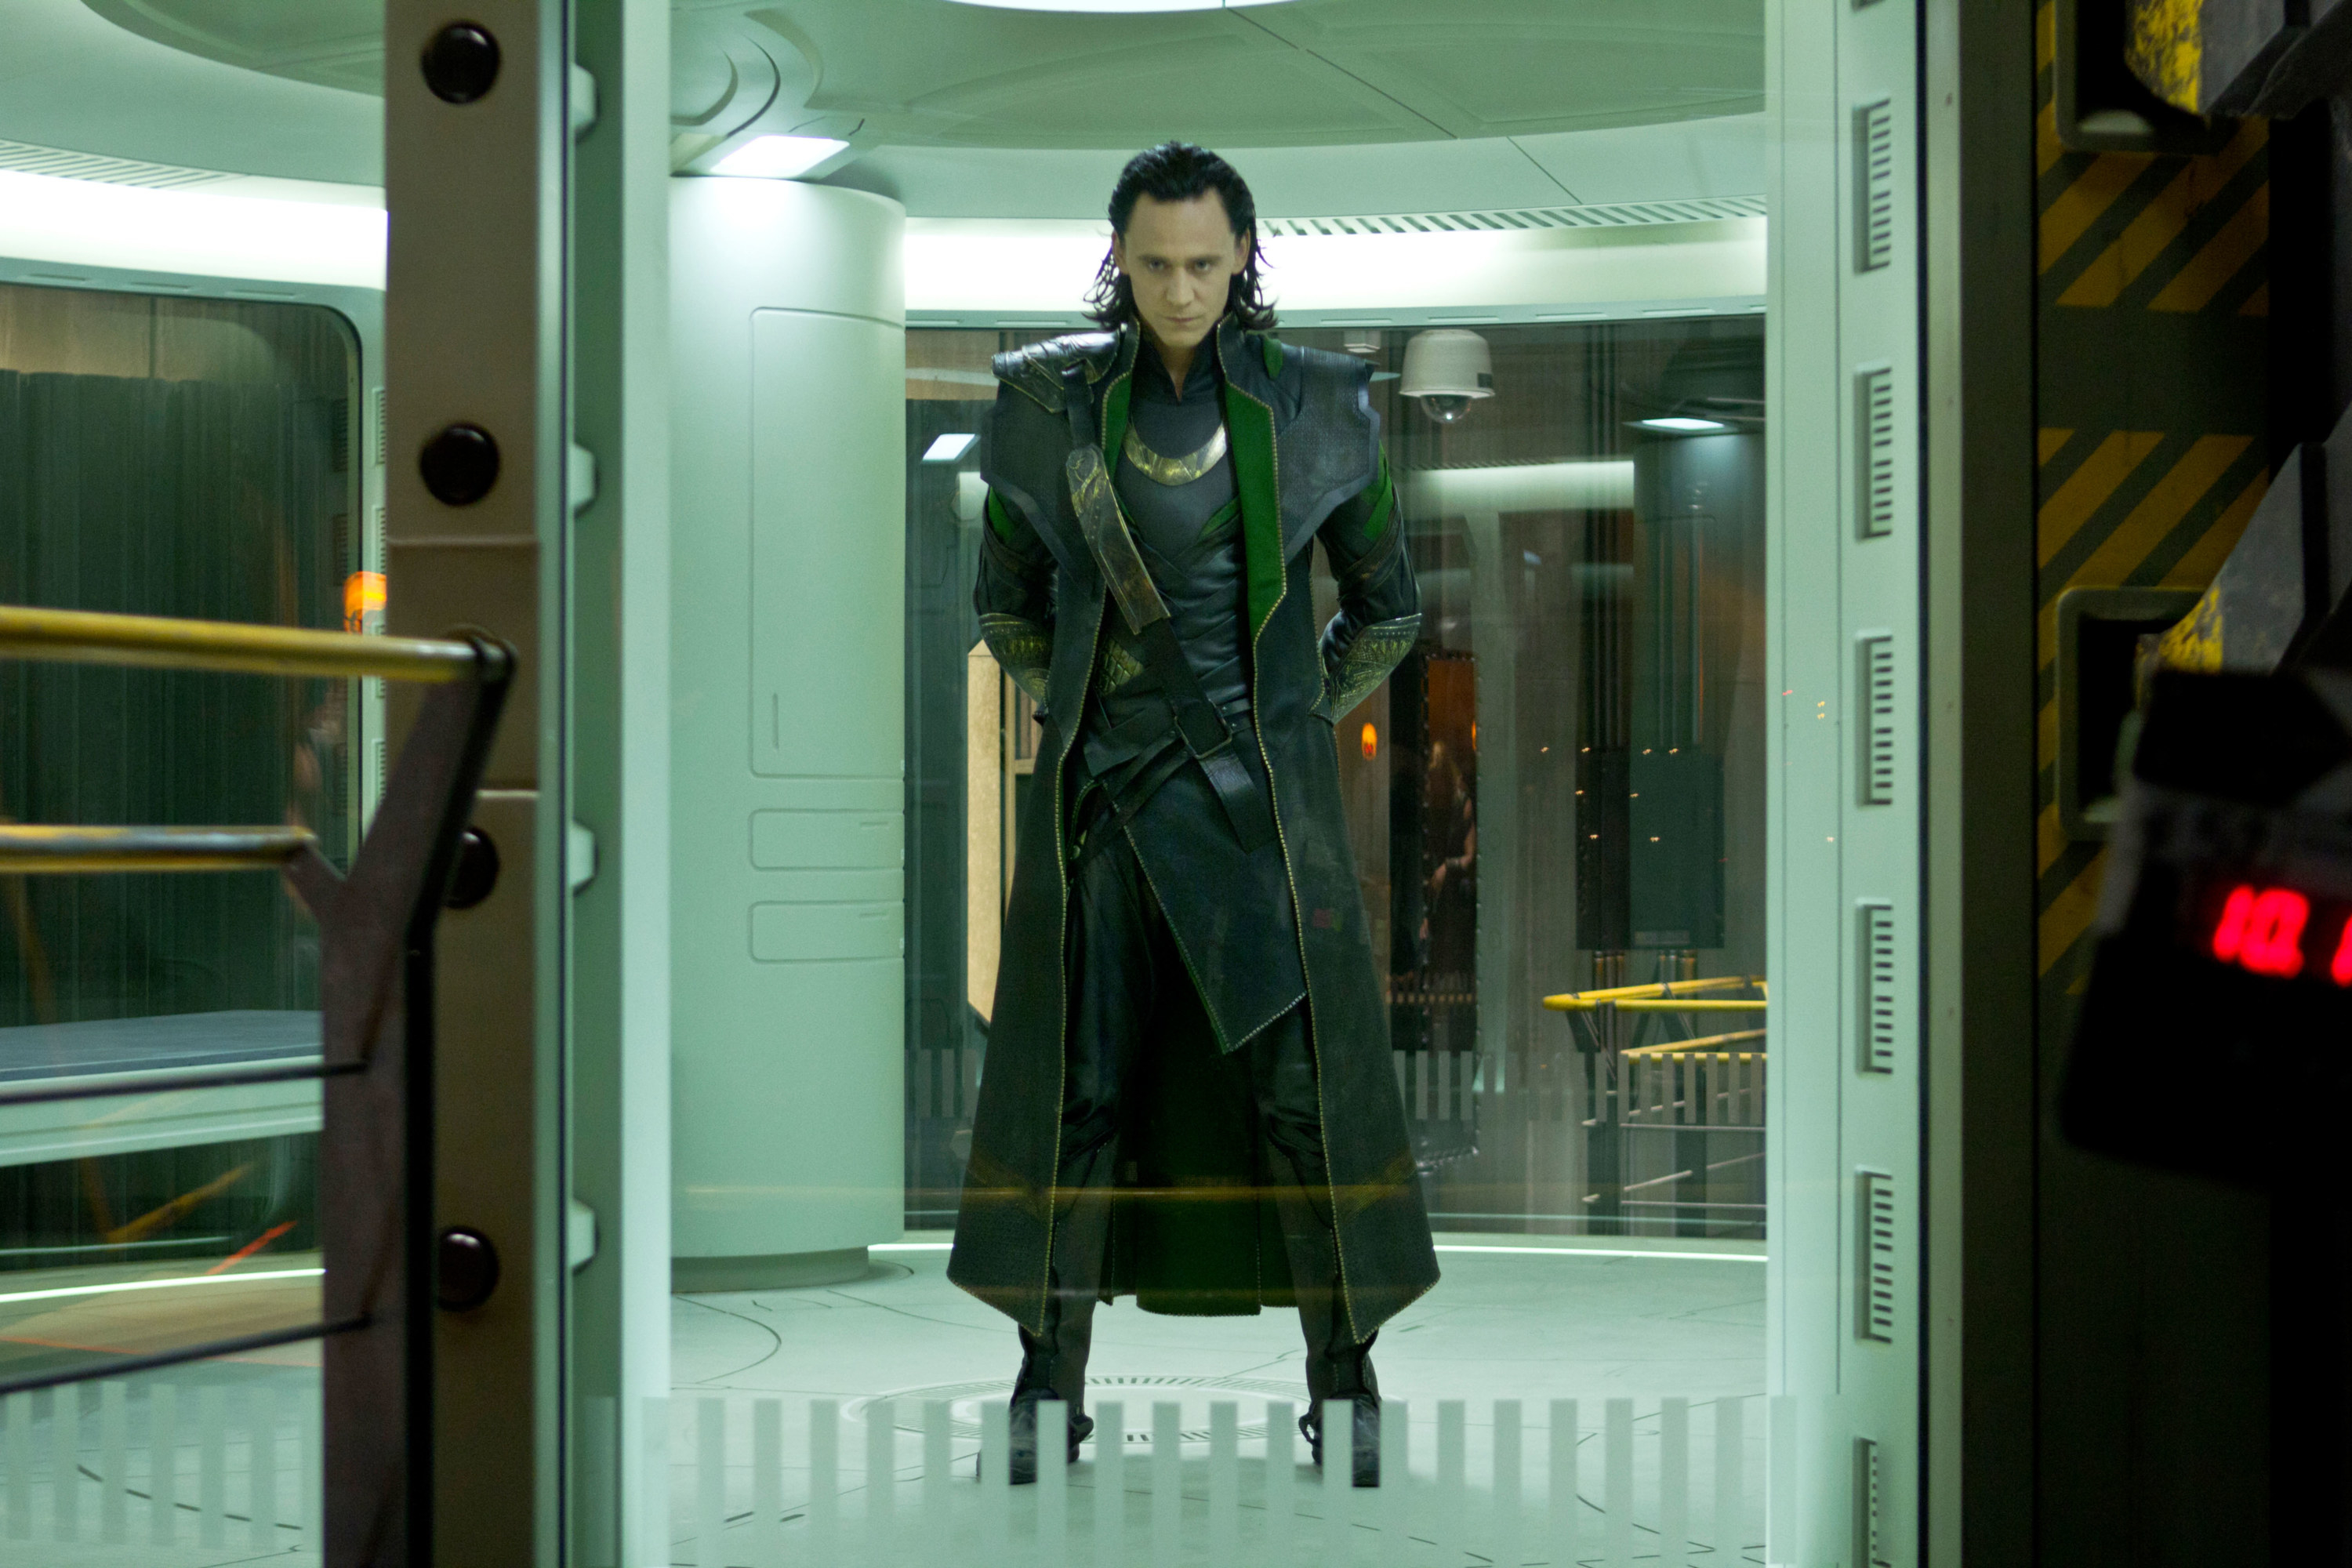 Loki stands patiently in his cell, waiting for his plan to fall into place